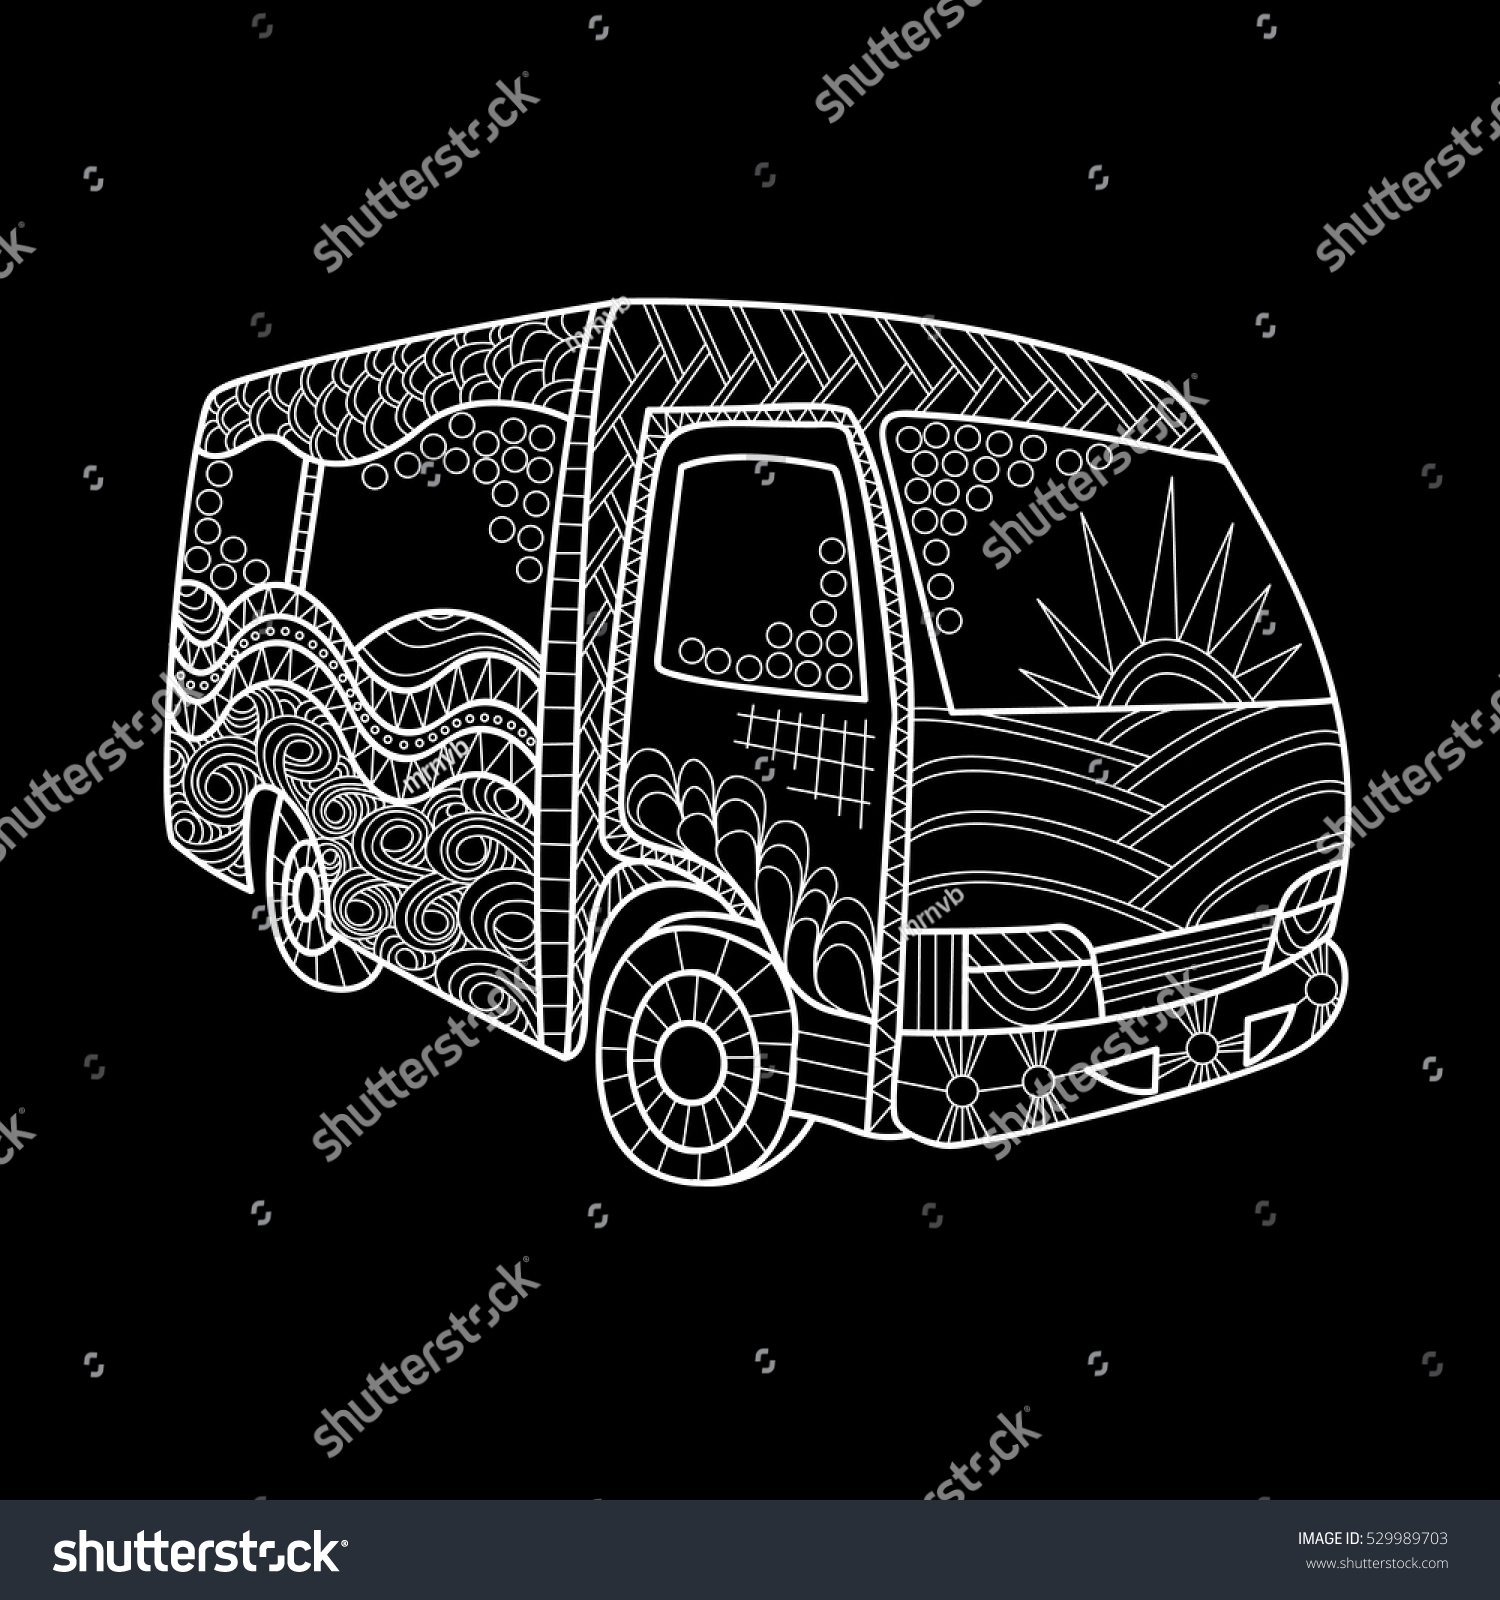 Handdrawn Bus Doodle Art Style Hippie Stock Vector Royalty Free